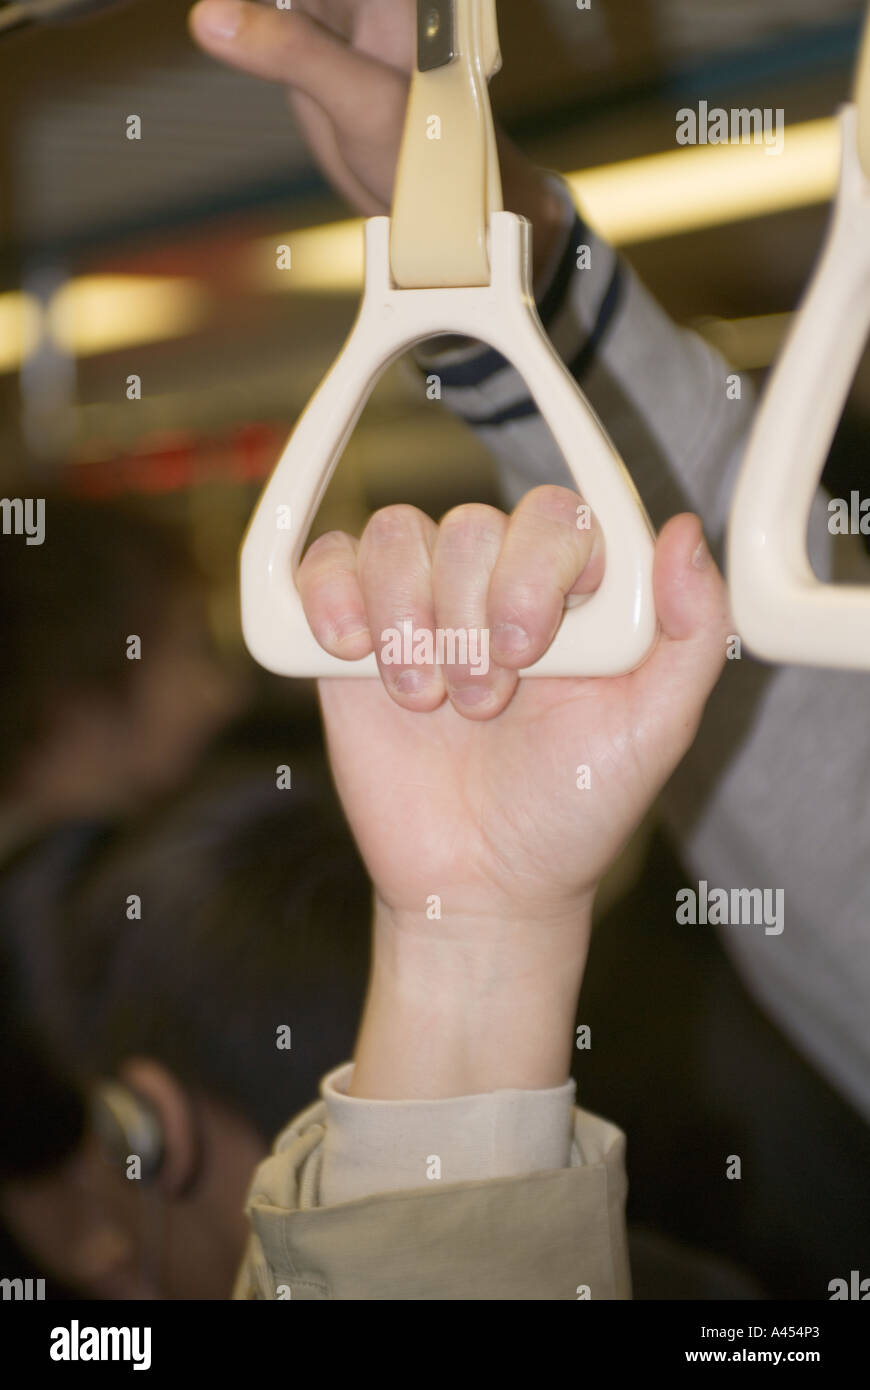 Close up Of Persons Hand Holding Handclasp Riding On Subway Taipei Taiwan China Stock Photo